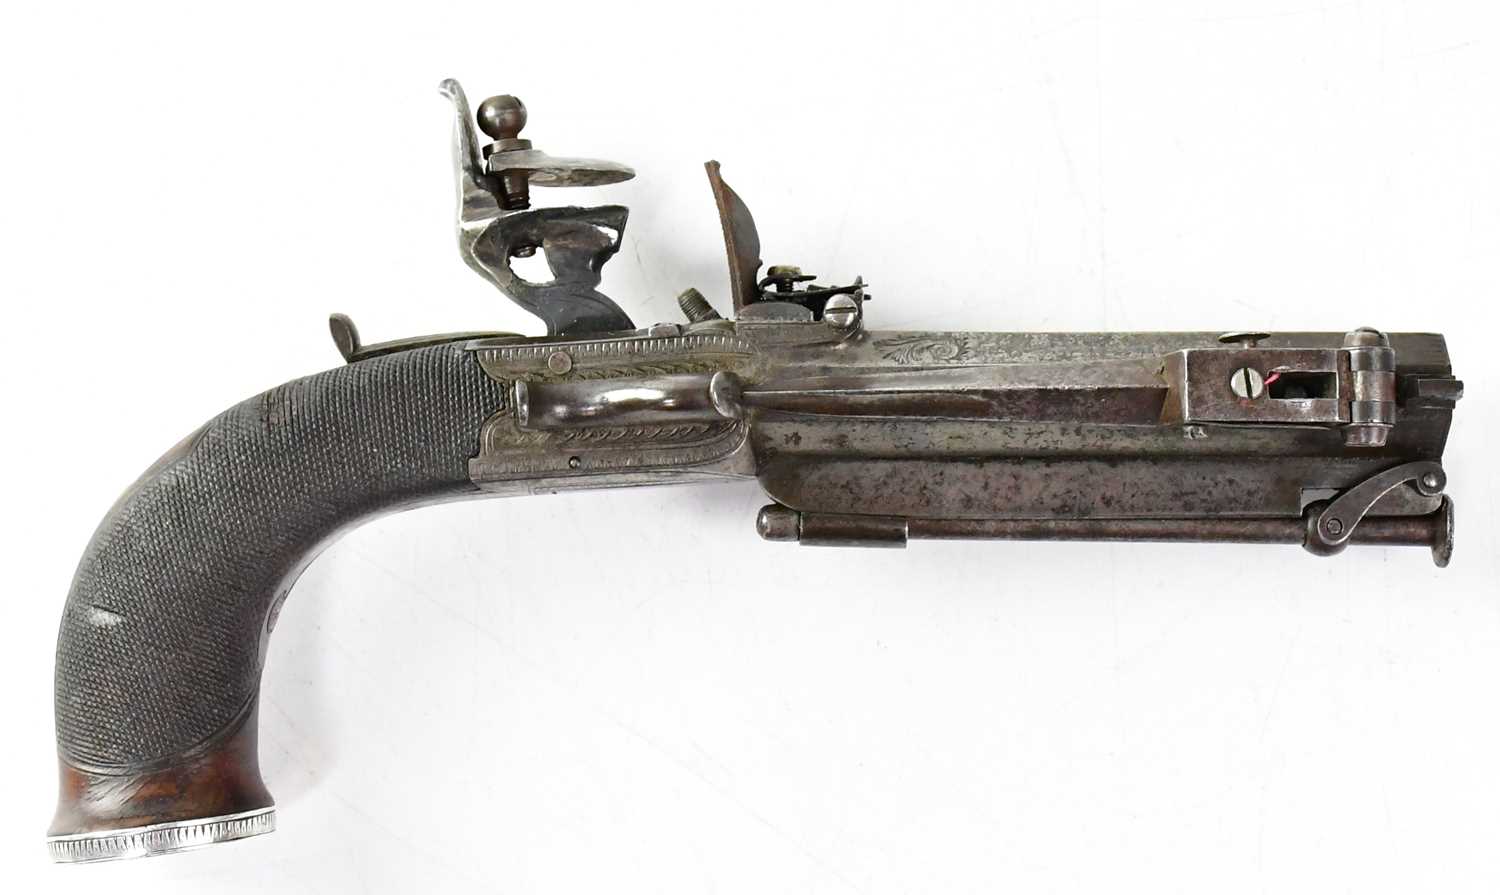 JAMES HAYWOOD, CHESTER; an unusual best quality dual ignition 42 bore pocket pistol, firing from